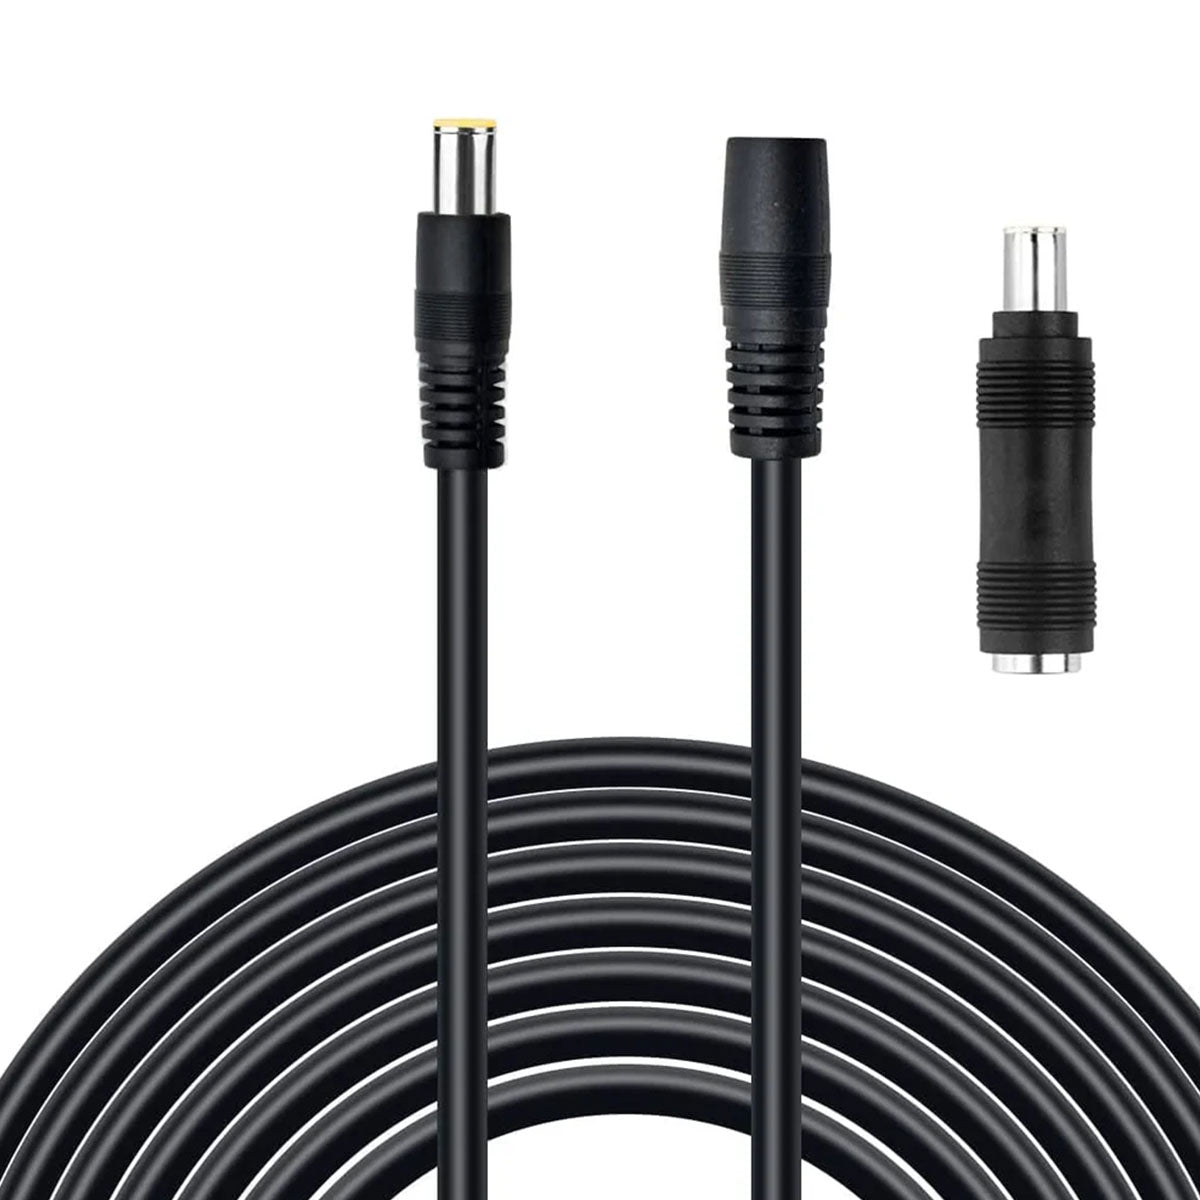 OUPES 20FT (6M) DC7909 Extension Cable